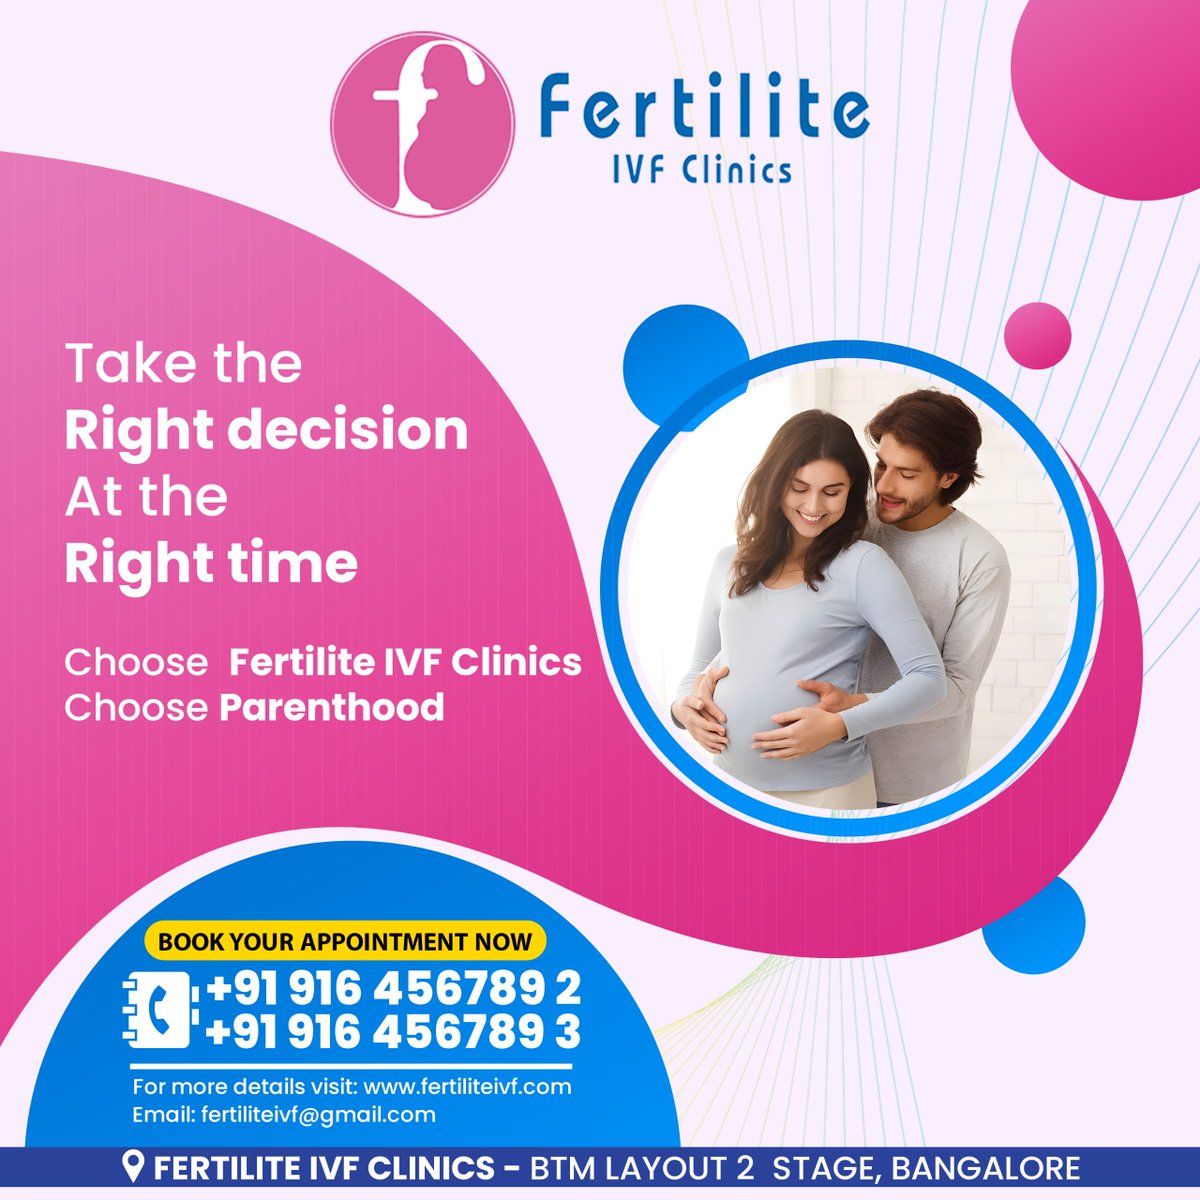 ⏰ **Take the Right Decision at the Right Time!** ⏰

🌐 For more details, visit: fertiliteivf.com
📧 Email: fertiliteivf@gmail.com

🏥 Location: FERTILITE IVF CLINICS - BTM LAYOUT 2 STAGE, BANGALORE

#FertiliteIVF #IVF #Parenthood #Family #FertilityClinic #Bangalore